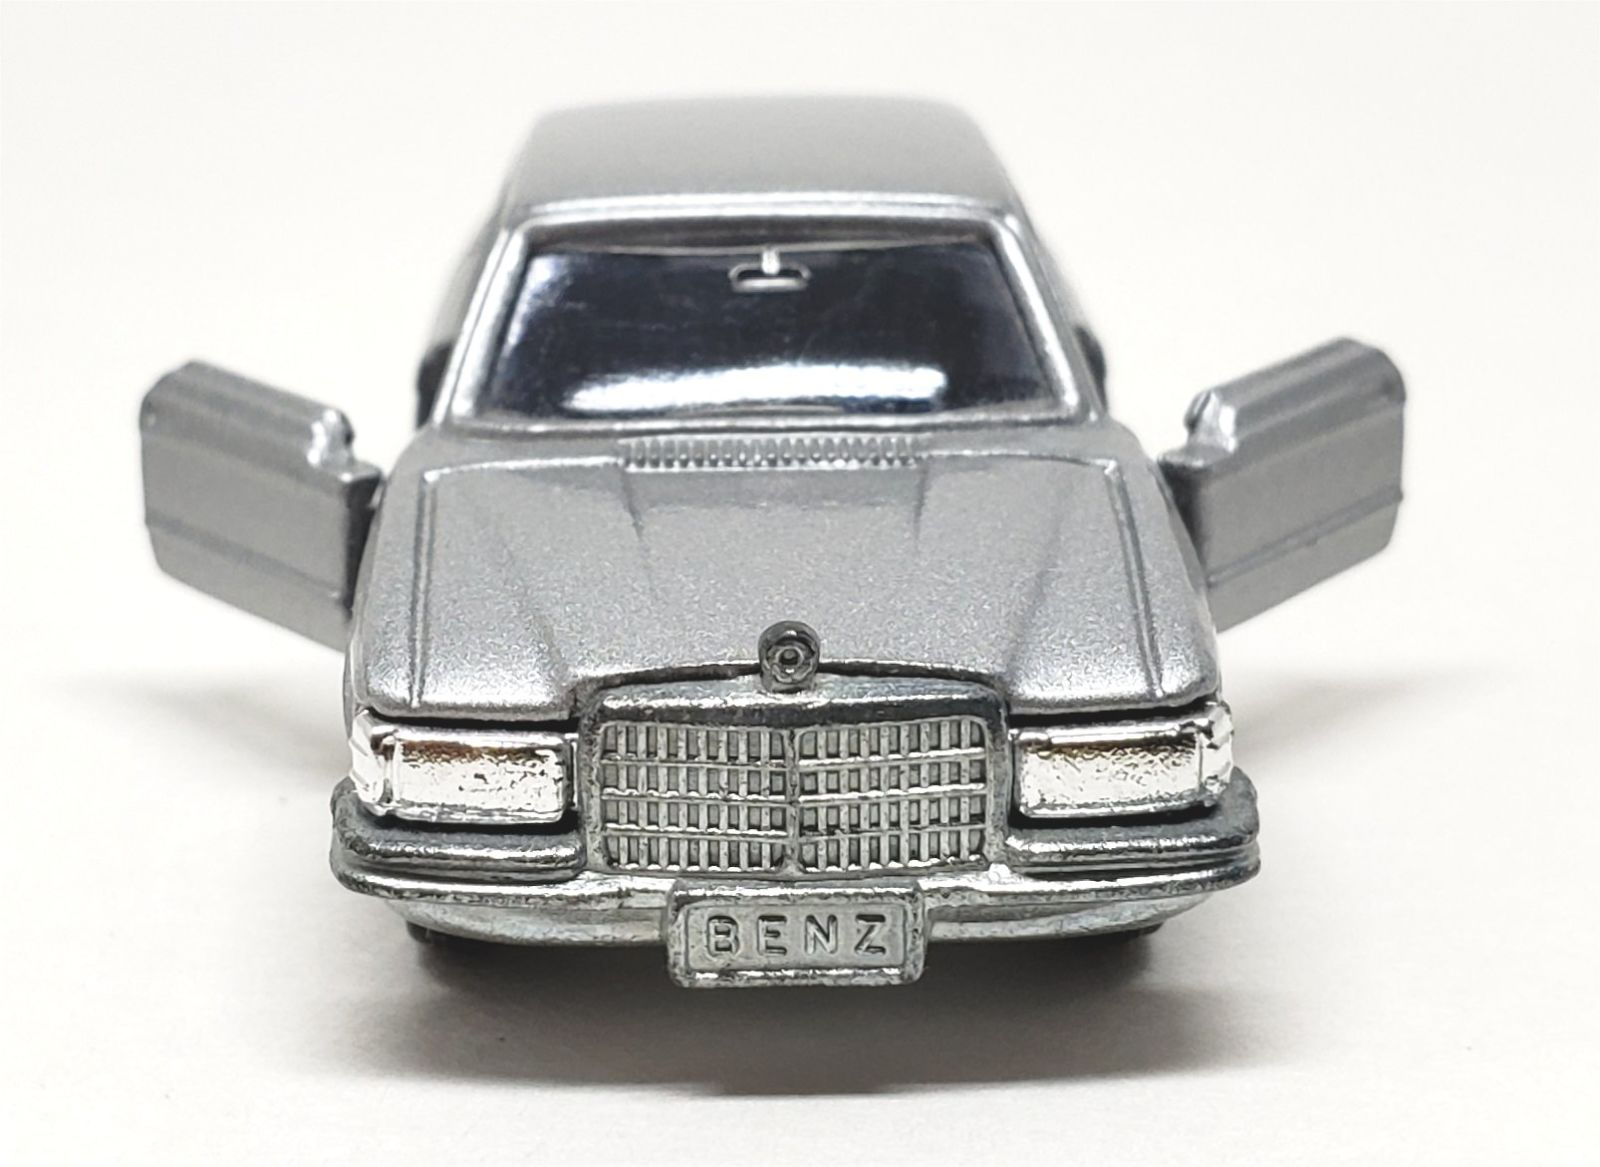 Illustration for article titled [REVIEW] Tomica Mercedes-Benz 450 SEL